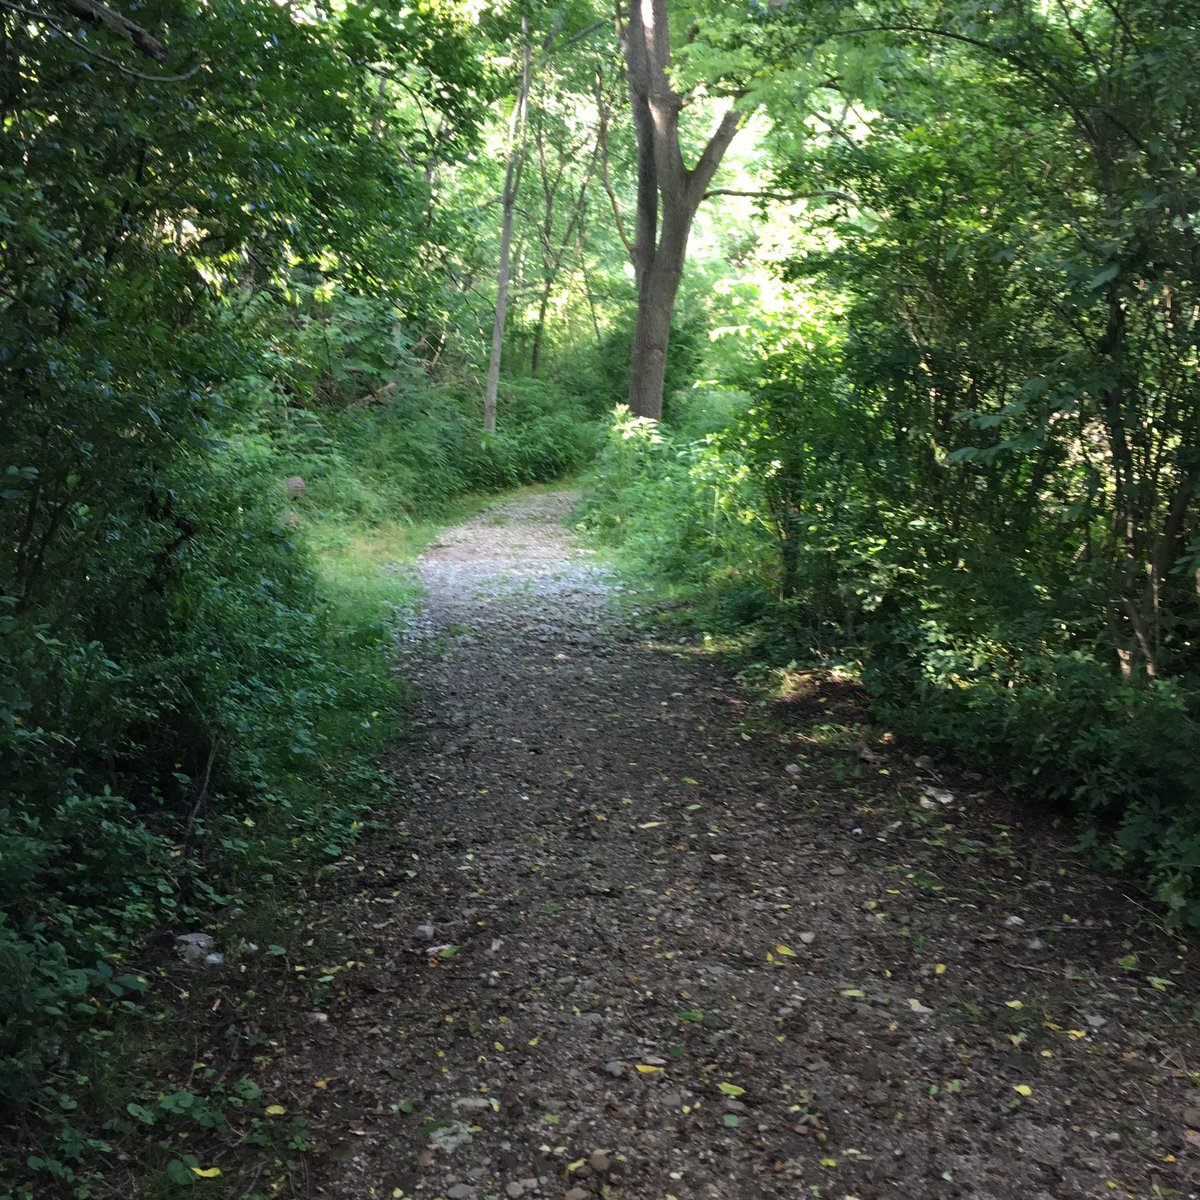 Just finished #trailrunning in @metro_parks #cascadevalley #chuckery it's a primitive trail and I love the severe climbs #summitpeeks